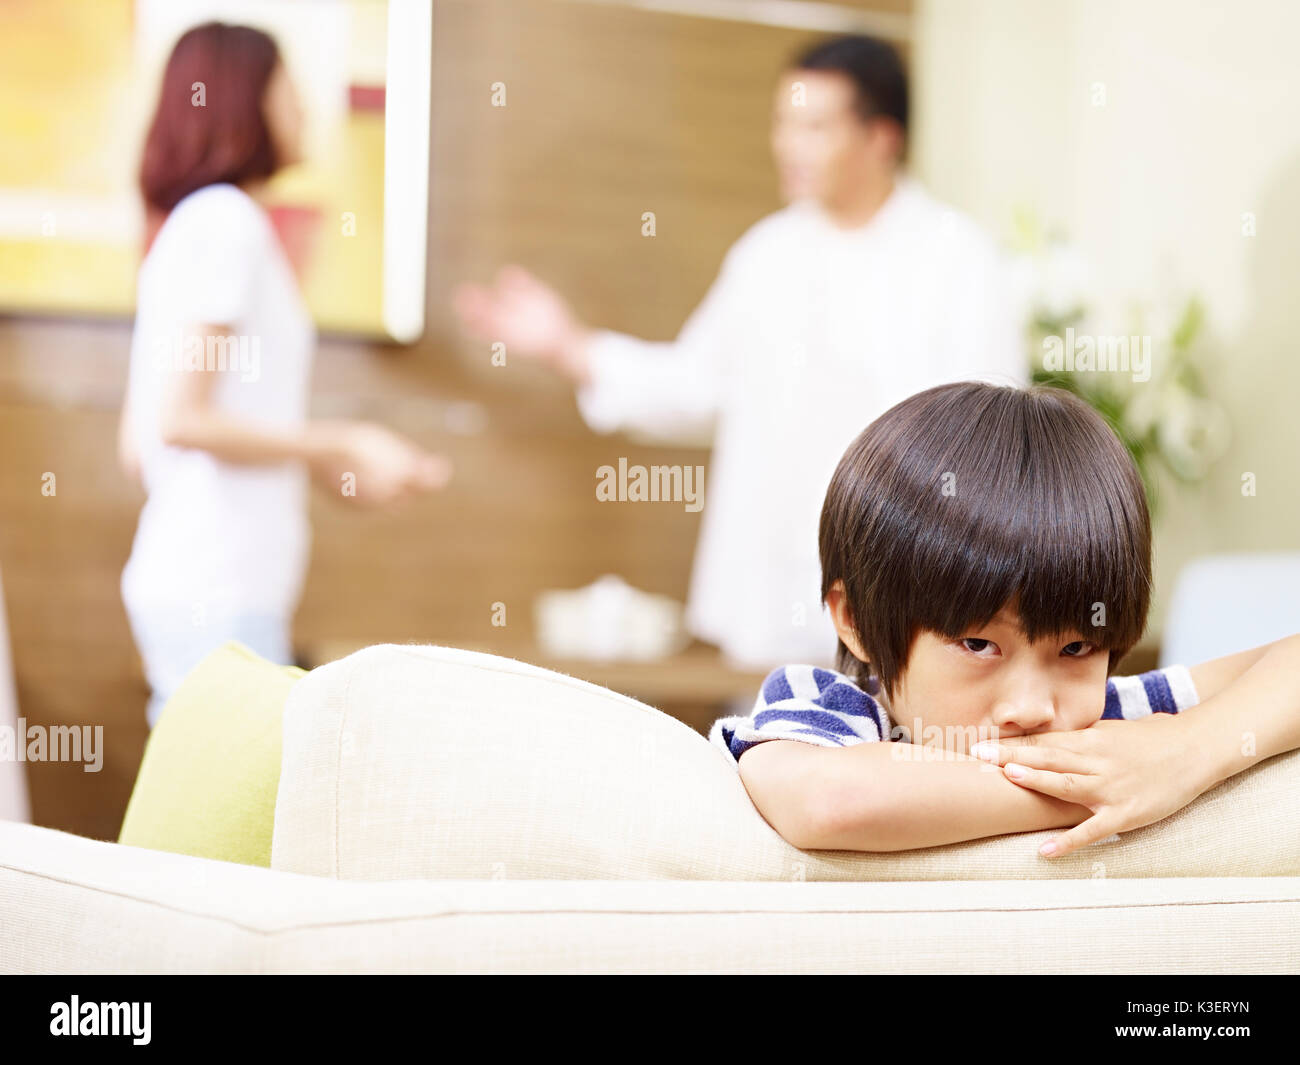 asian child appears sad and unhappy while parents quarreling in the background. Stock Photo